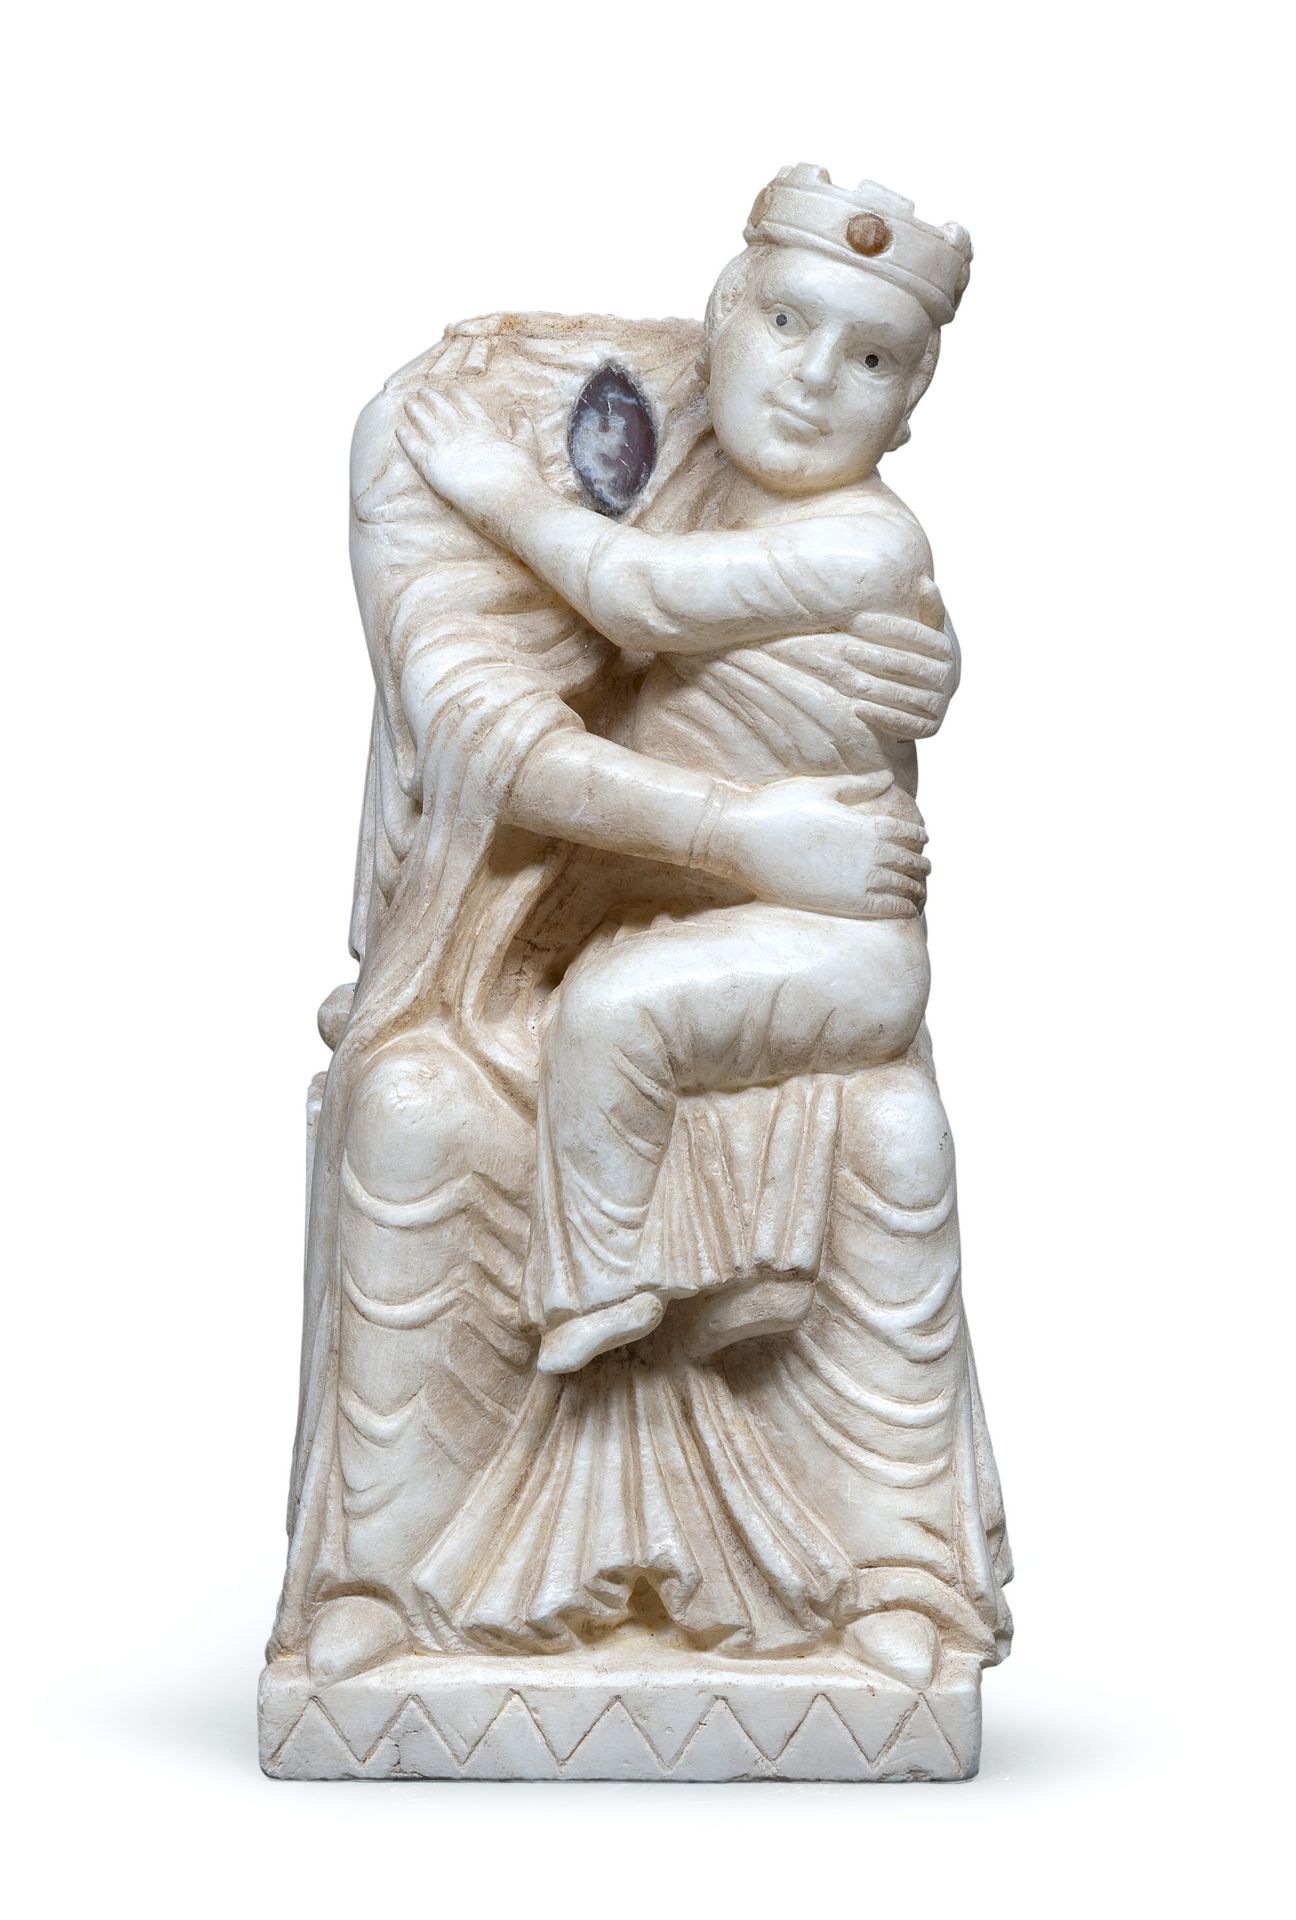 TUSCAN MARBLE SCULPTURE 16TH CENTURY